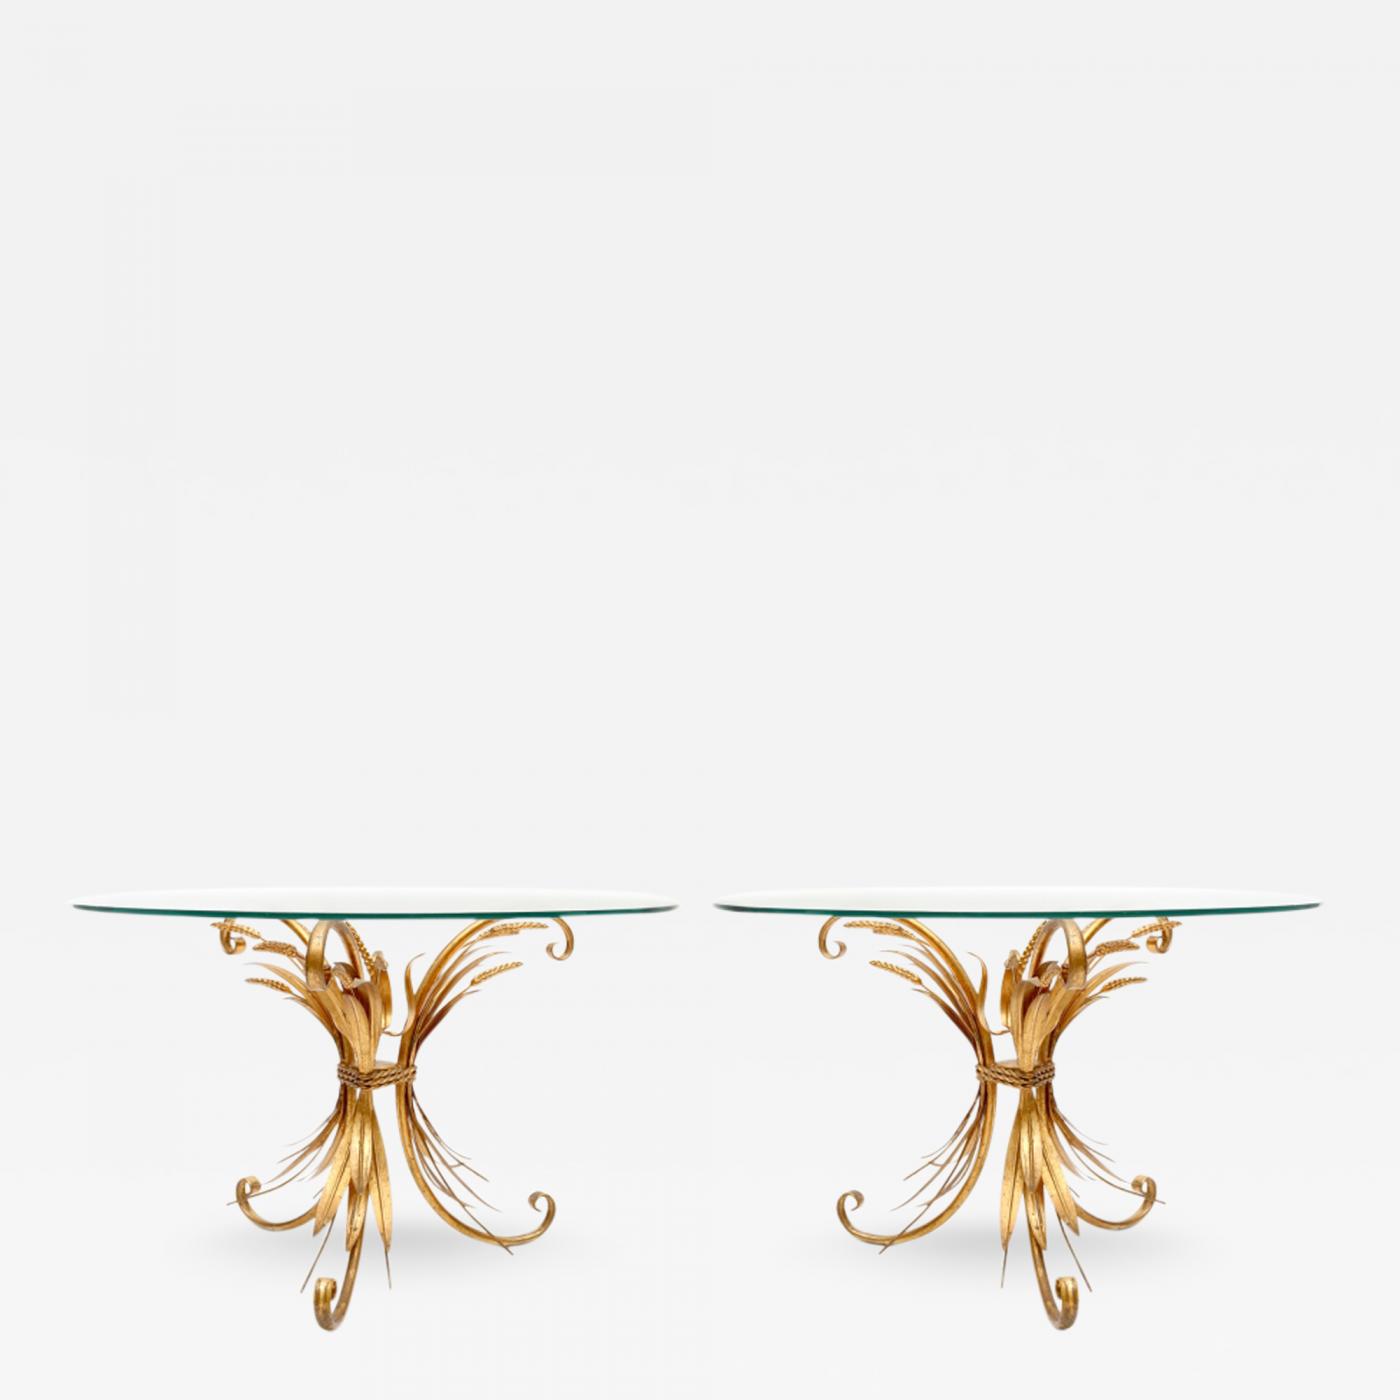 French Art Deco Sheaf of Wheat Table by Coco Chanel